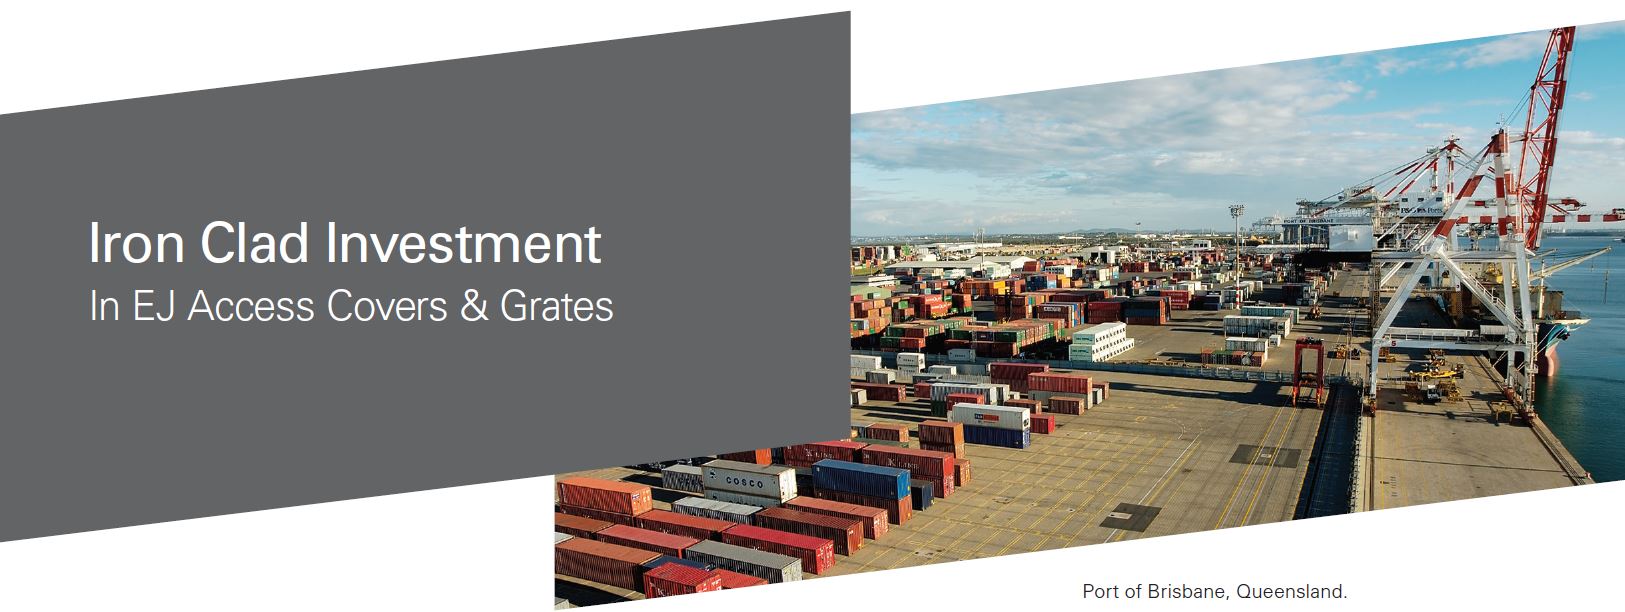 Port of Brisbane - Iron Clad Investment in EJ Access Covers & Grates